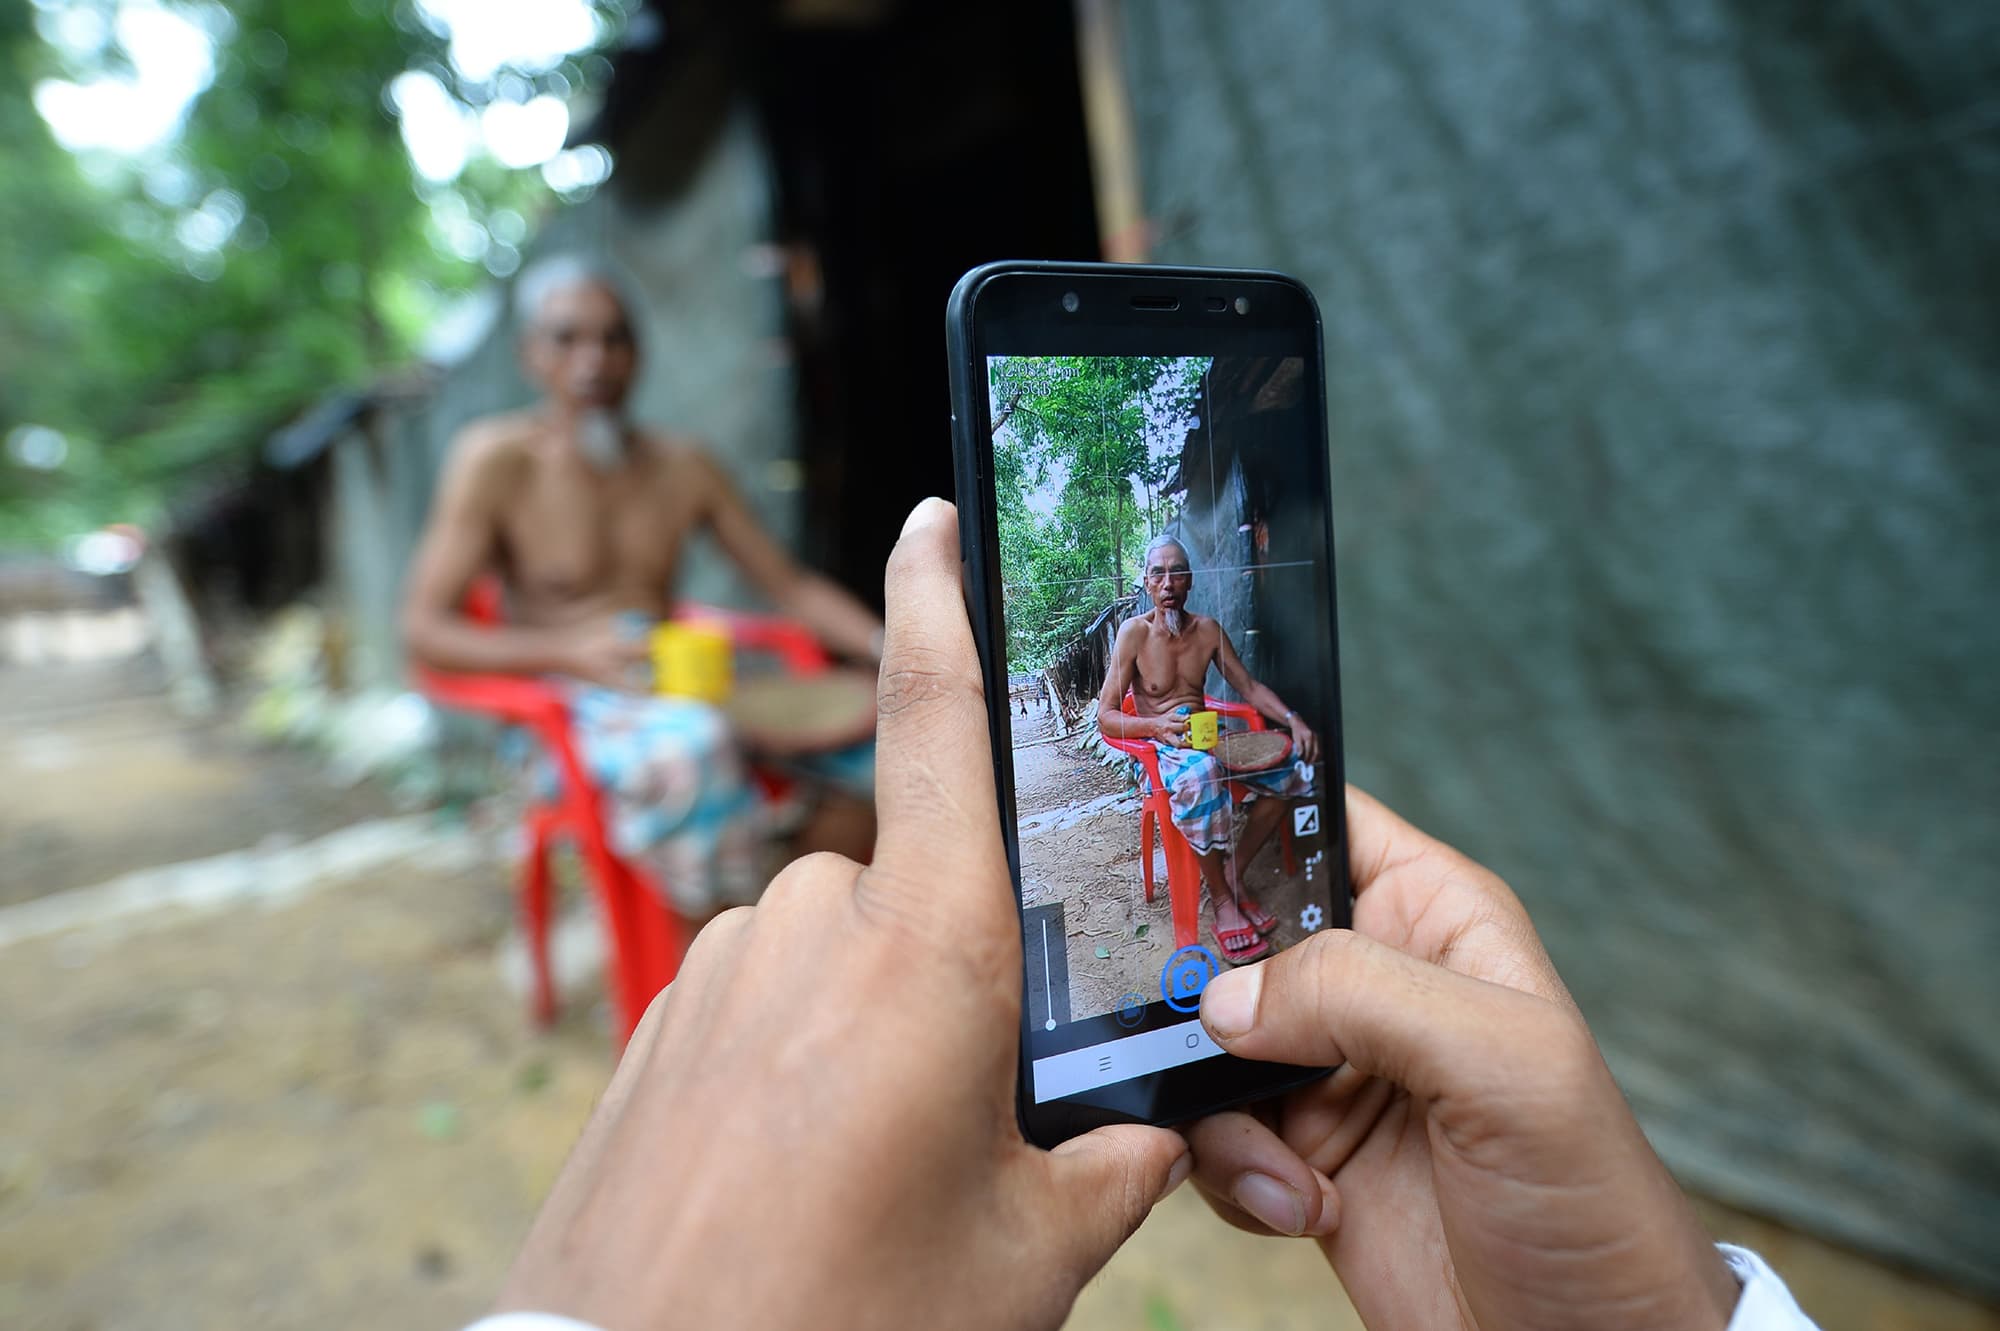 In this picture taken on July 23, 2019, Rohingya youth Mohammad Rafiq uses his mobile phone to take photos of a man by his shack at the Kutupalong refugee camp.  Photo by Munir Uz Zaman/AFP